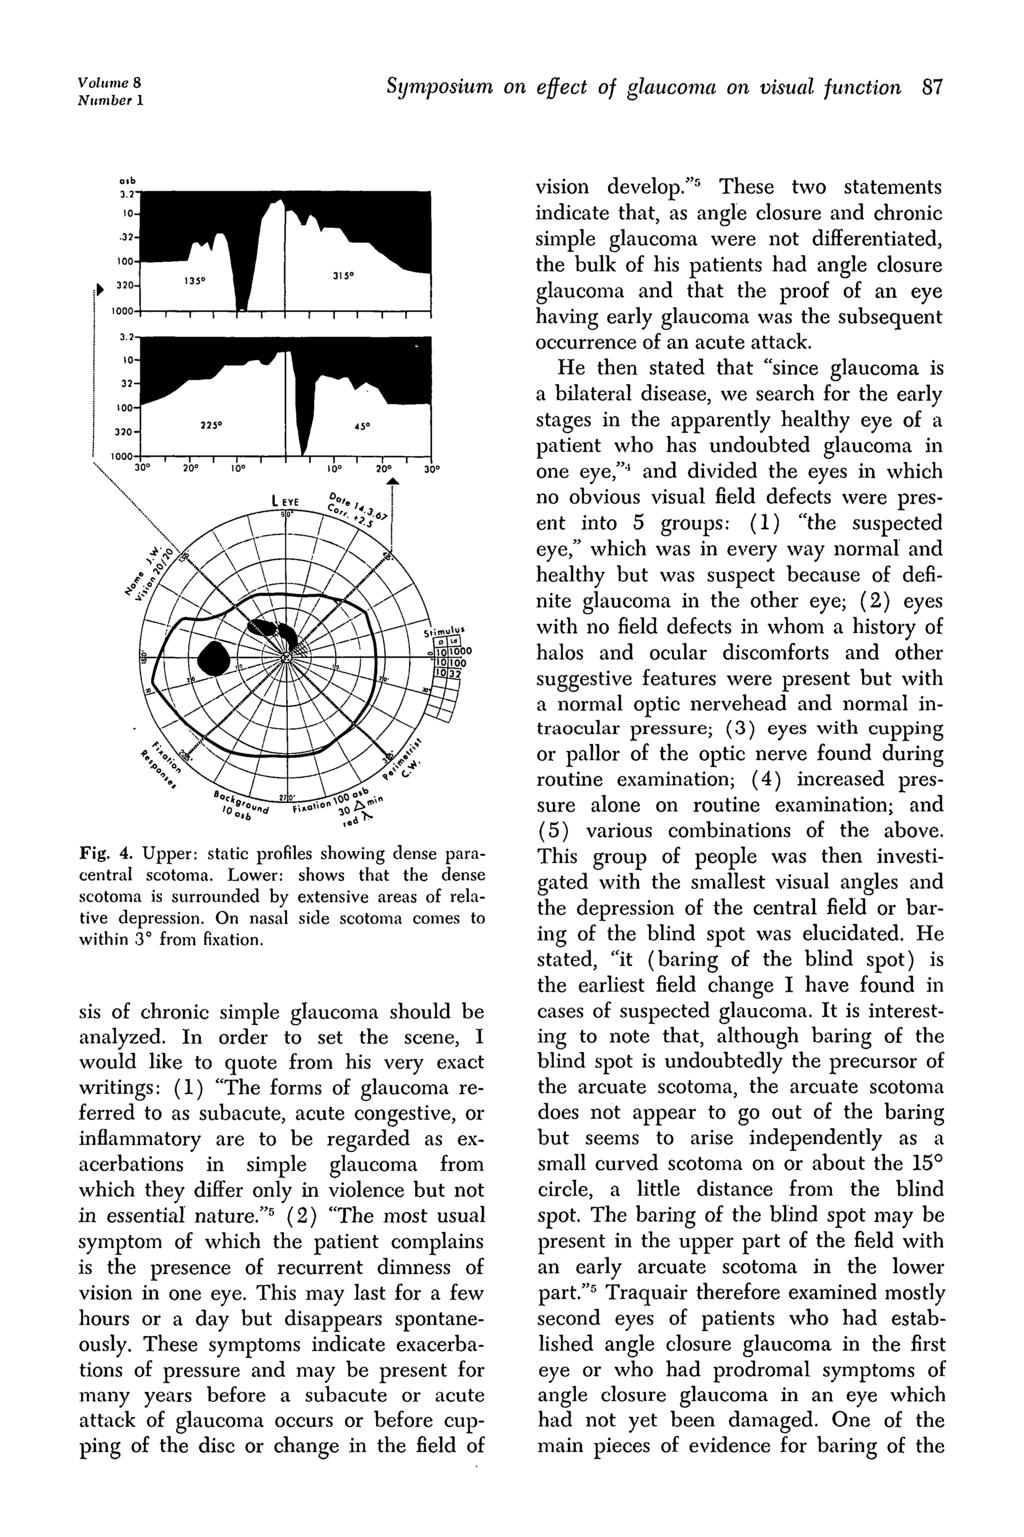 Volume 8 Number 1 Symposium on effect of glaucoma on visual function 87 ft. ' Fig. 4. Upper: static profiles showing dense paracentral scotoma.